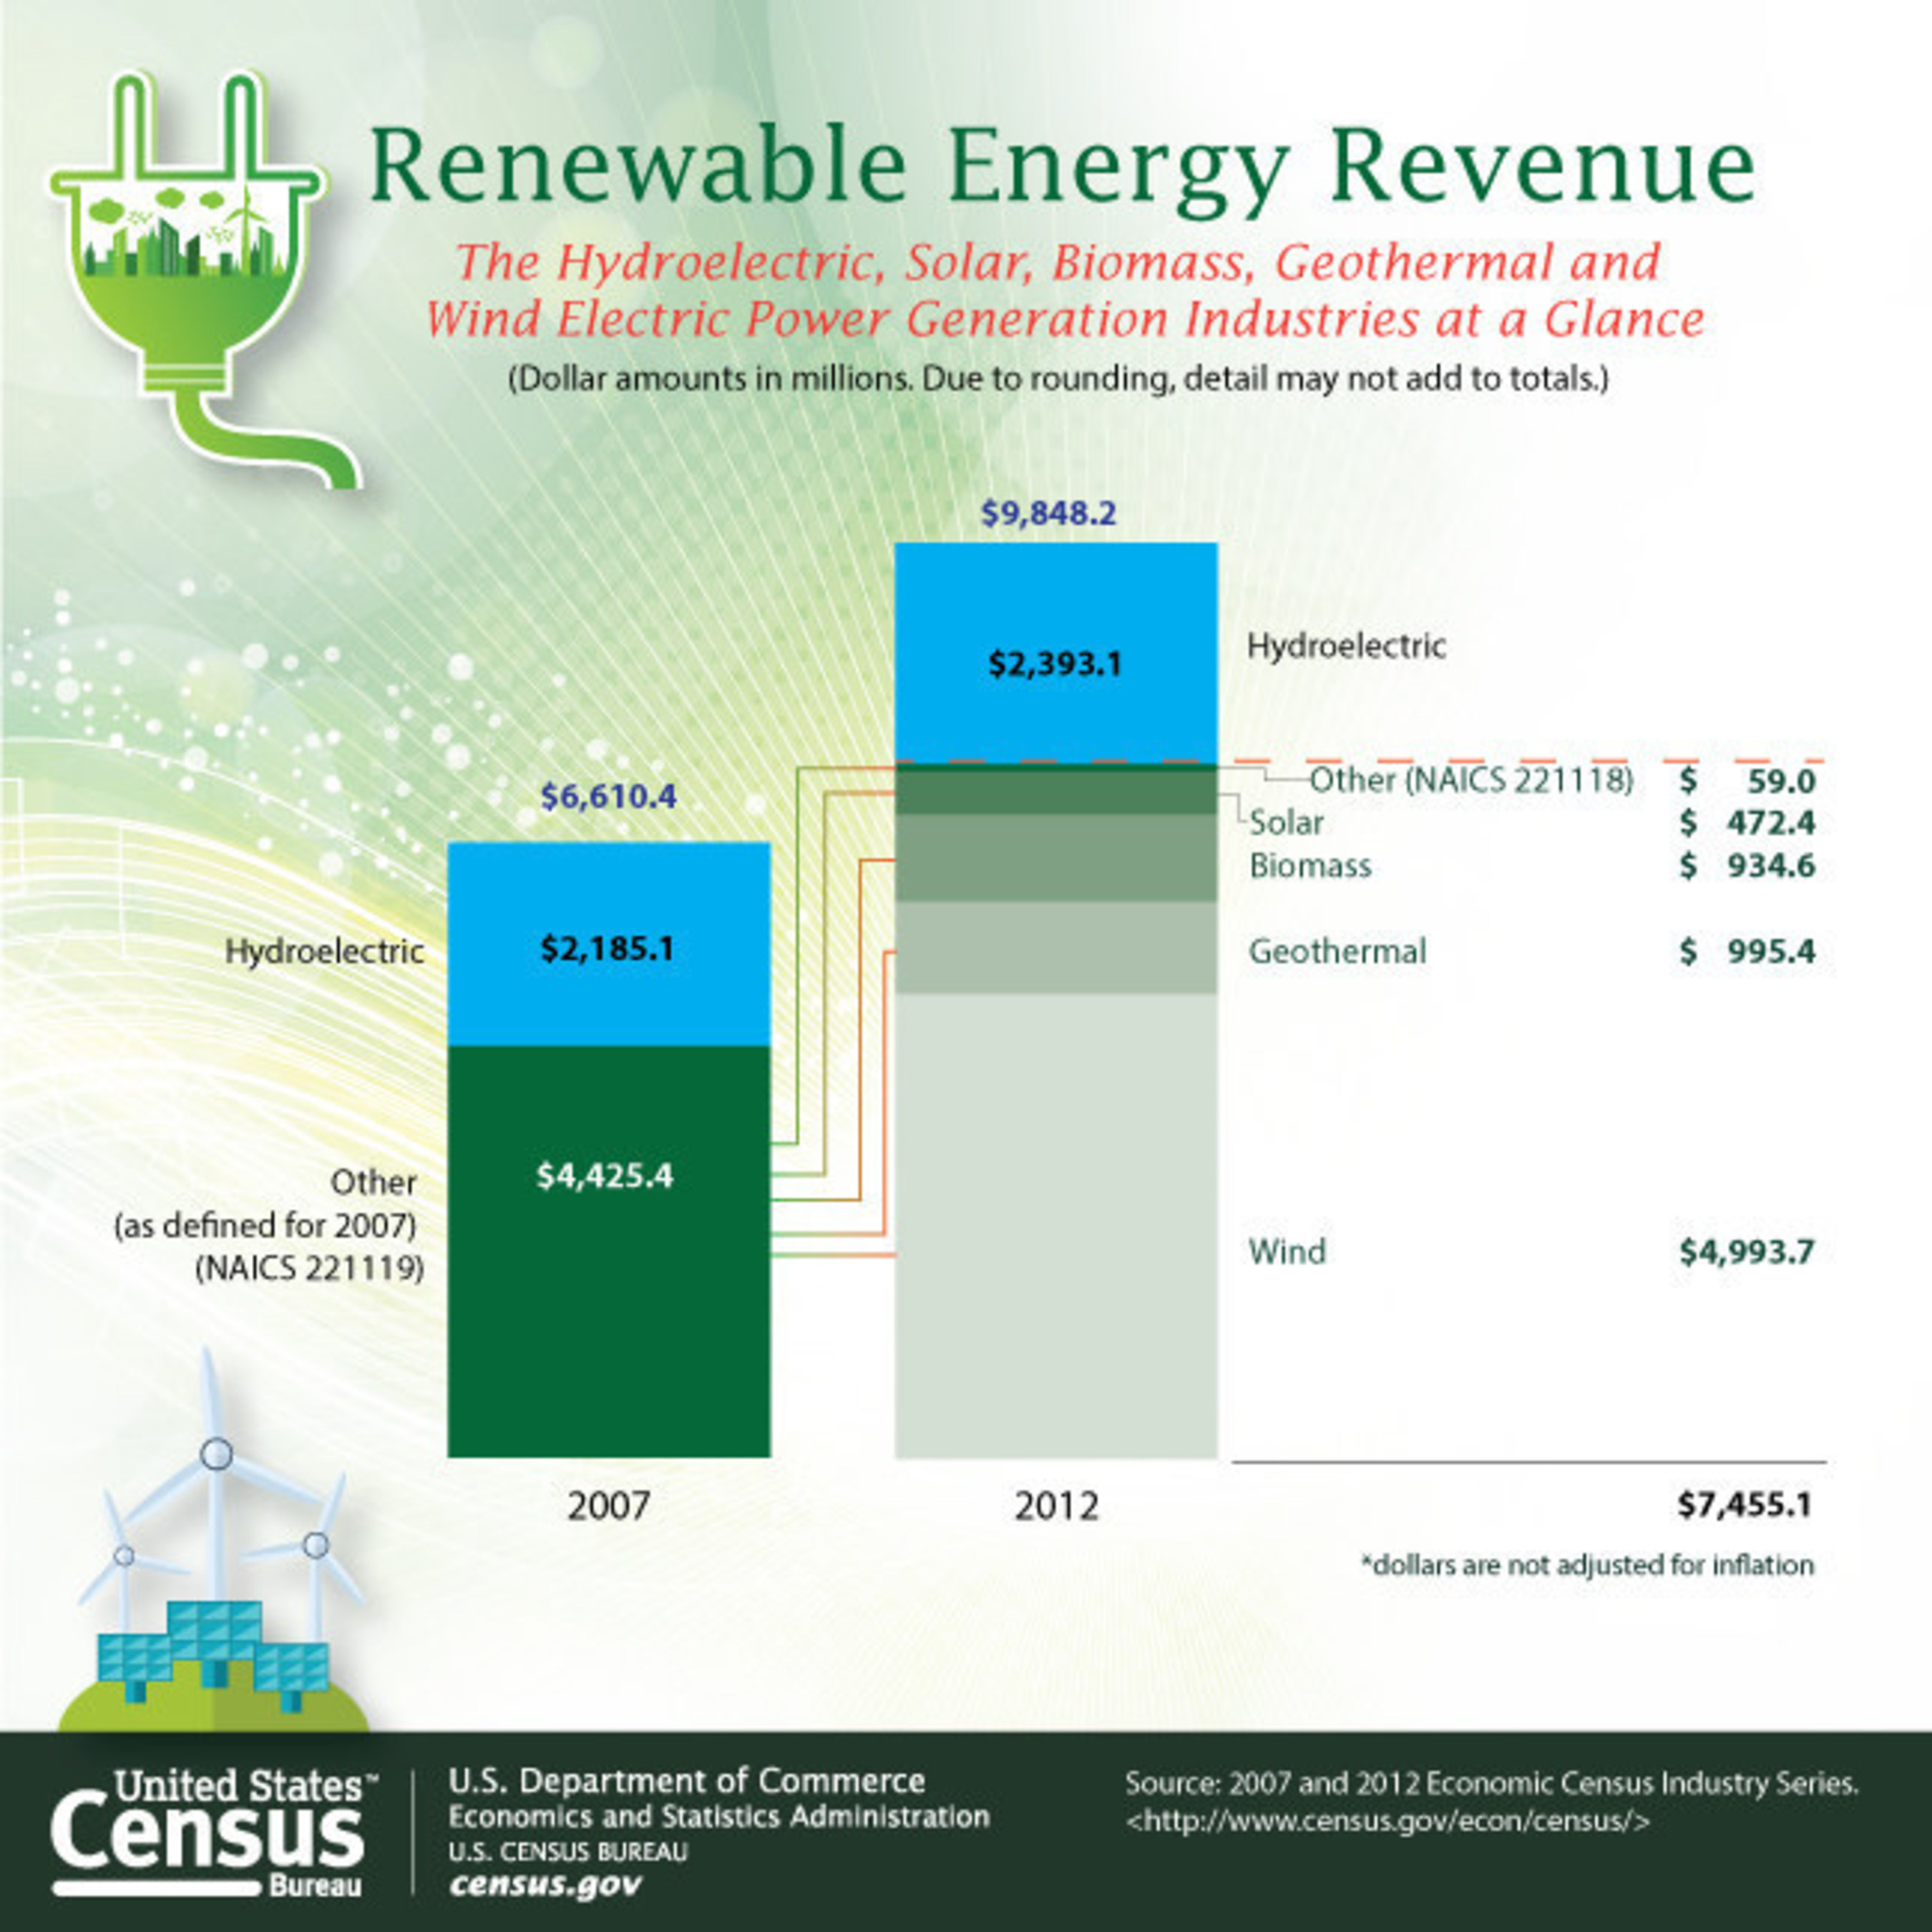 Revenues for electric power generation industries that use renewable energy resources rose 49.0 percent from $6.6 billion in 2007 to $9.8 billion in 2012, according to Census Bureau Economic Census statistics released today. In 2012, revenues for the wind electric power generation industry totaled $5.0 billion, the highest among industries using renewable energy resources; such industries also include hydroelectric, solar, biomass and geothermal. These industries are part of the electric power generation industry, whose revenues declined 1.2 percent.